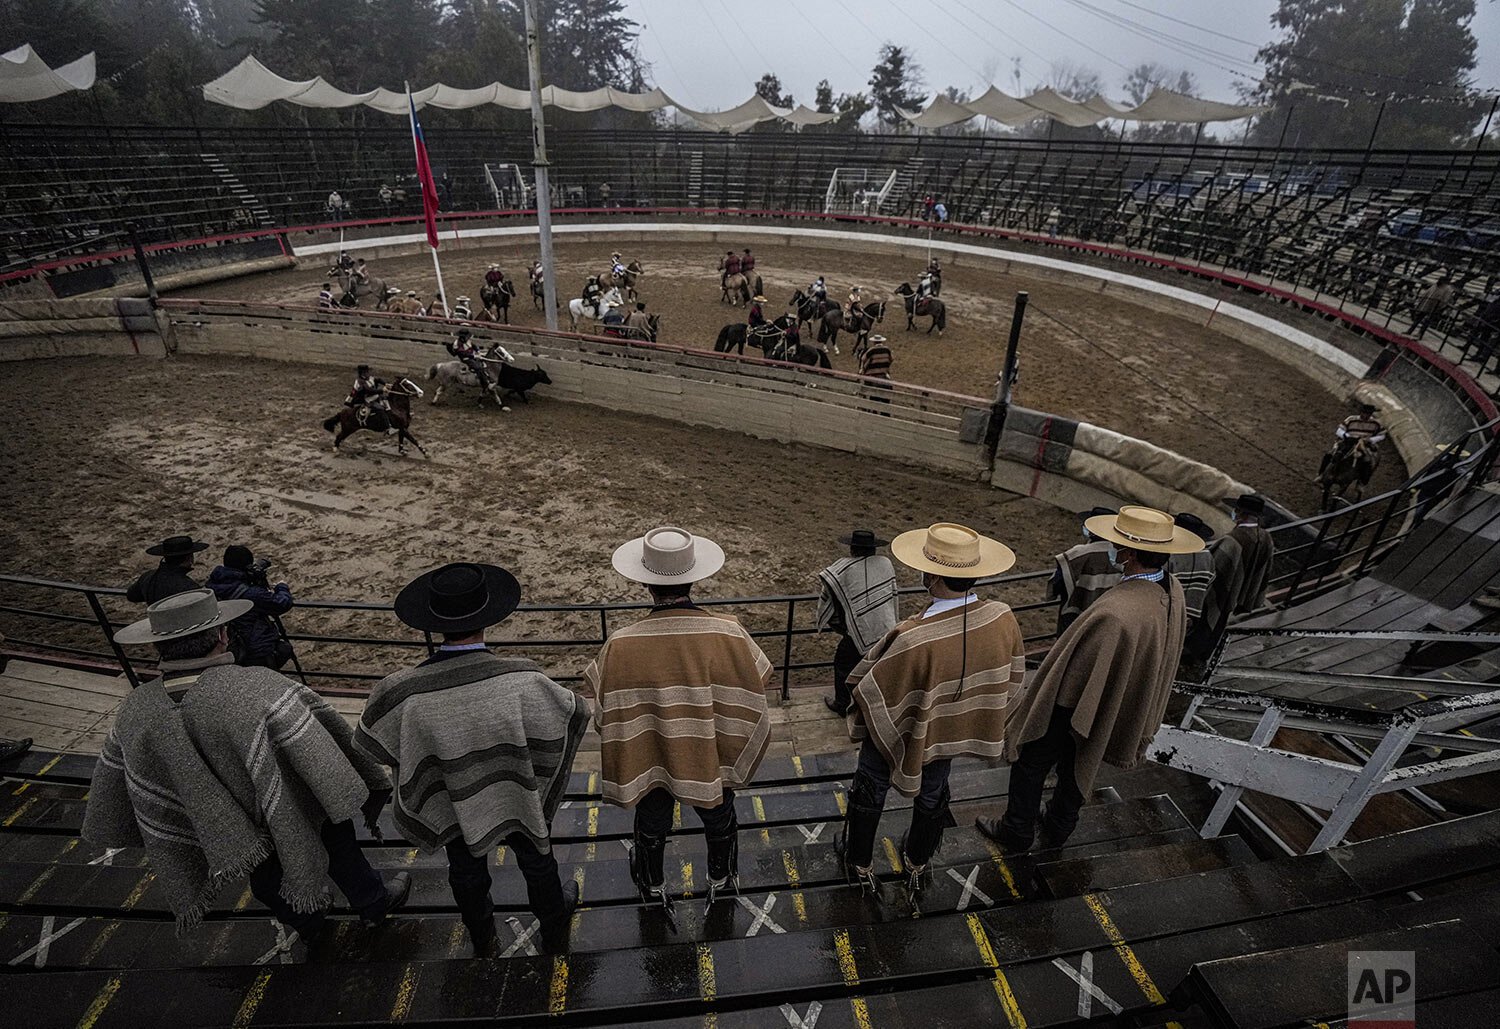  Horseback riders attend a rodeo, a centerpiece of the country's Independence Day celebrations, at an arena empty of spectators due to COVID-19 restrictions in Melipilla, Sept. 18, 2021. (AP Photo/Esteban Felix) 